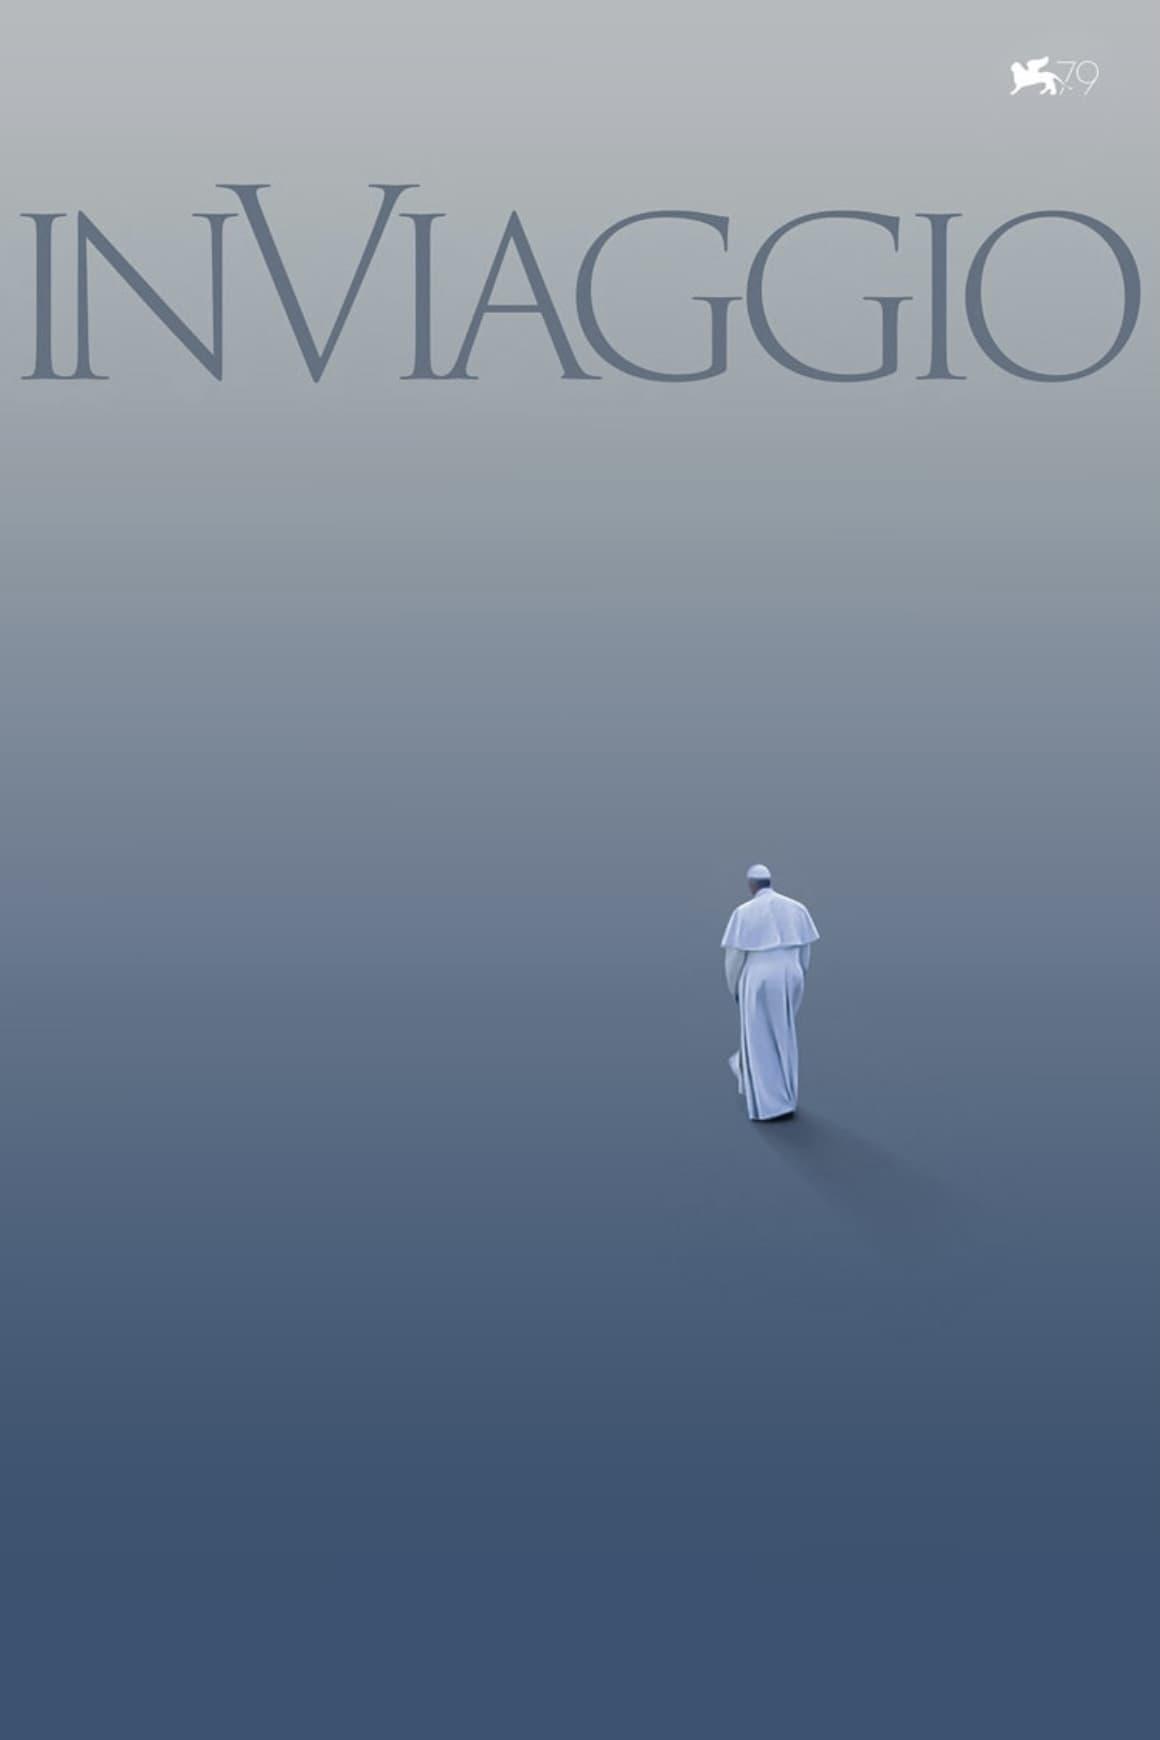 In Viaggio: The Travels of Pope Francis poster